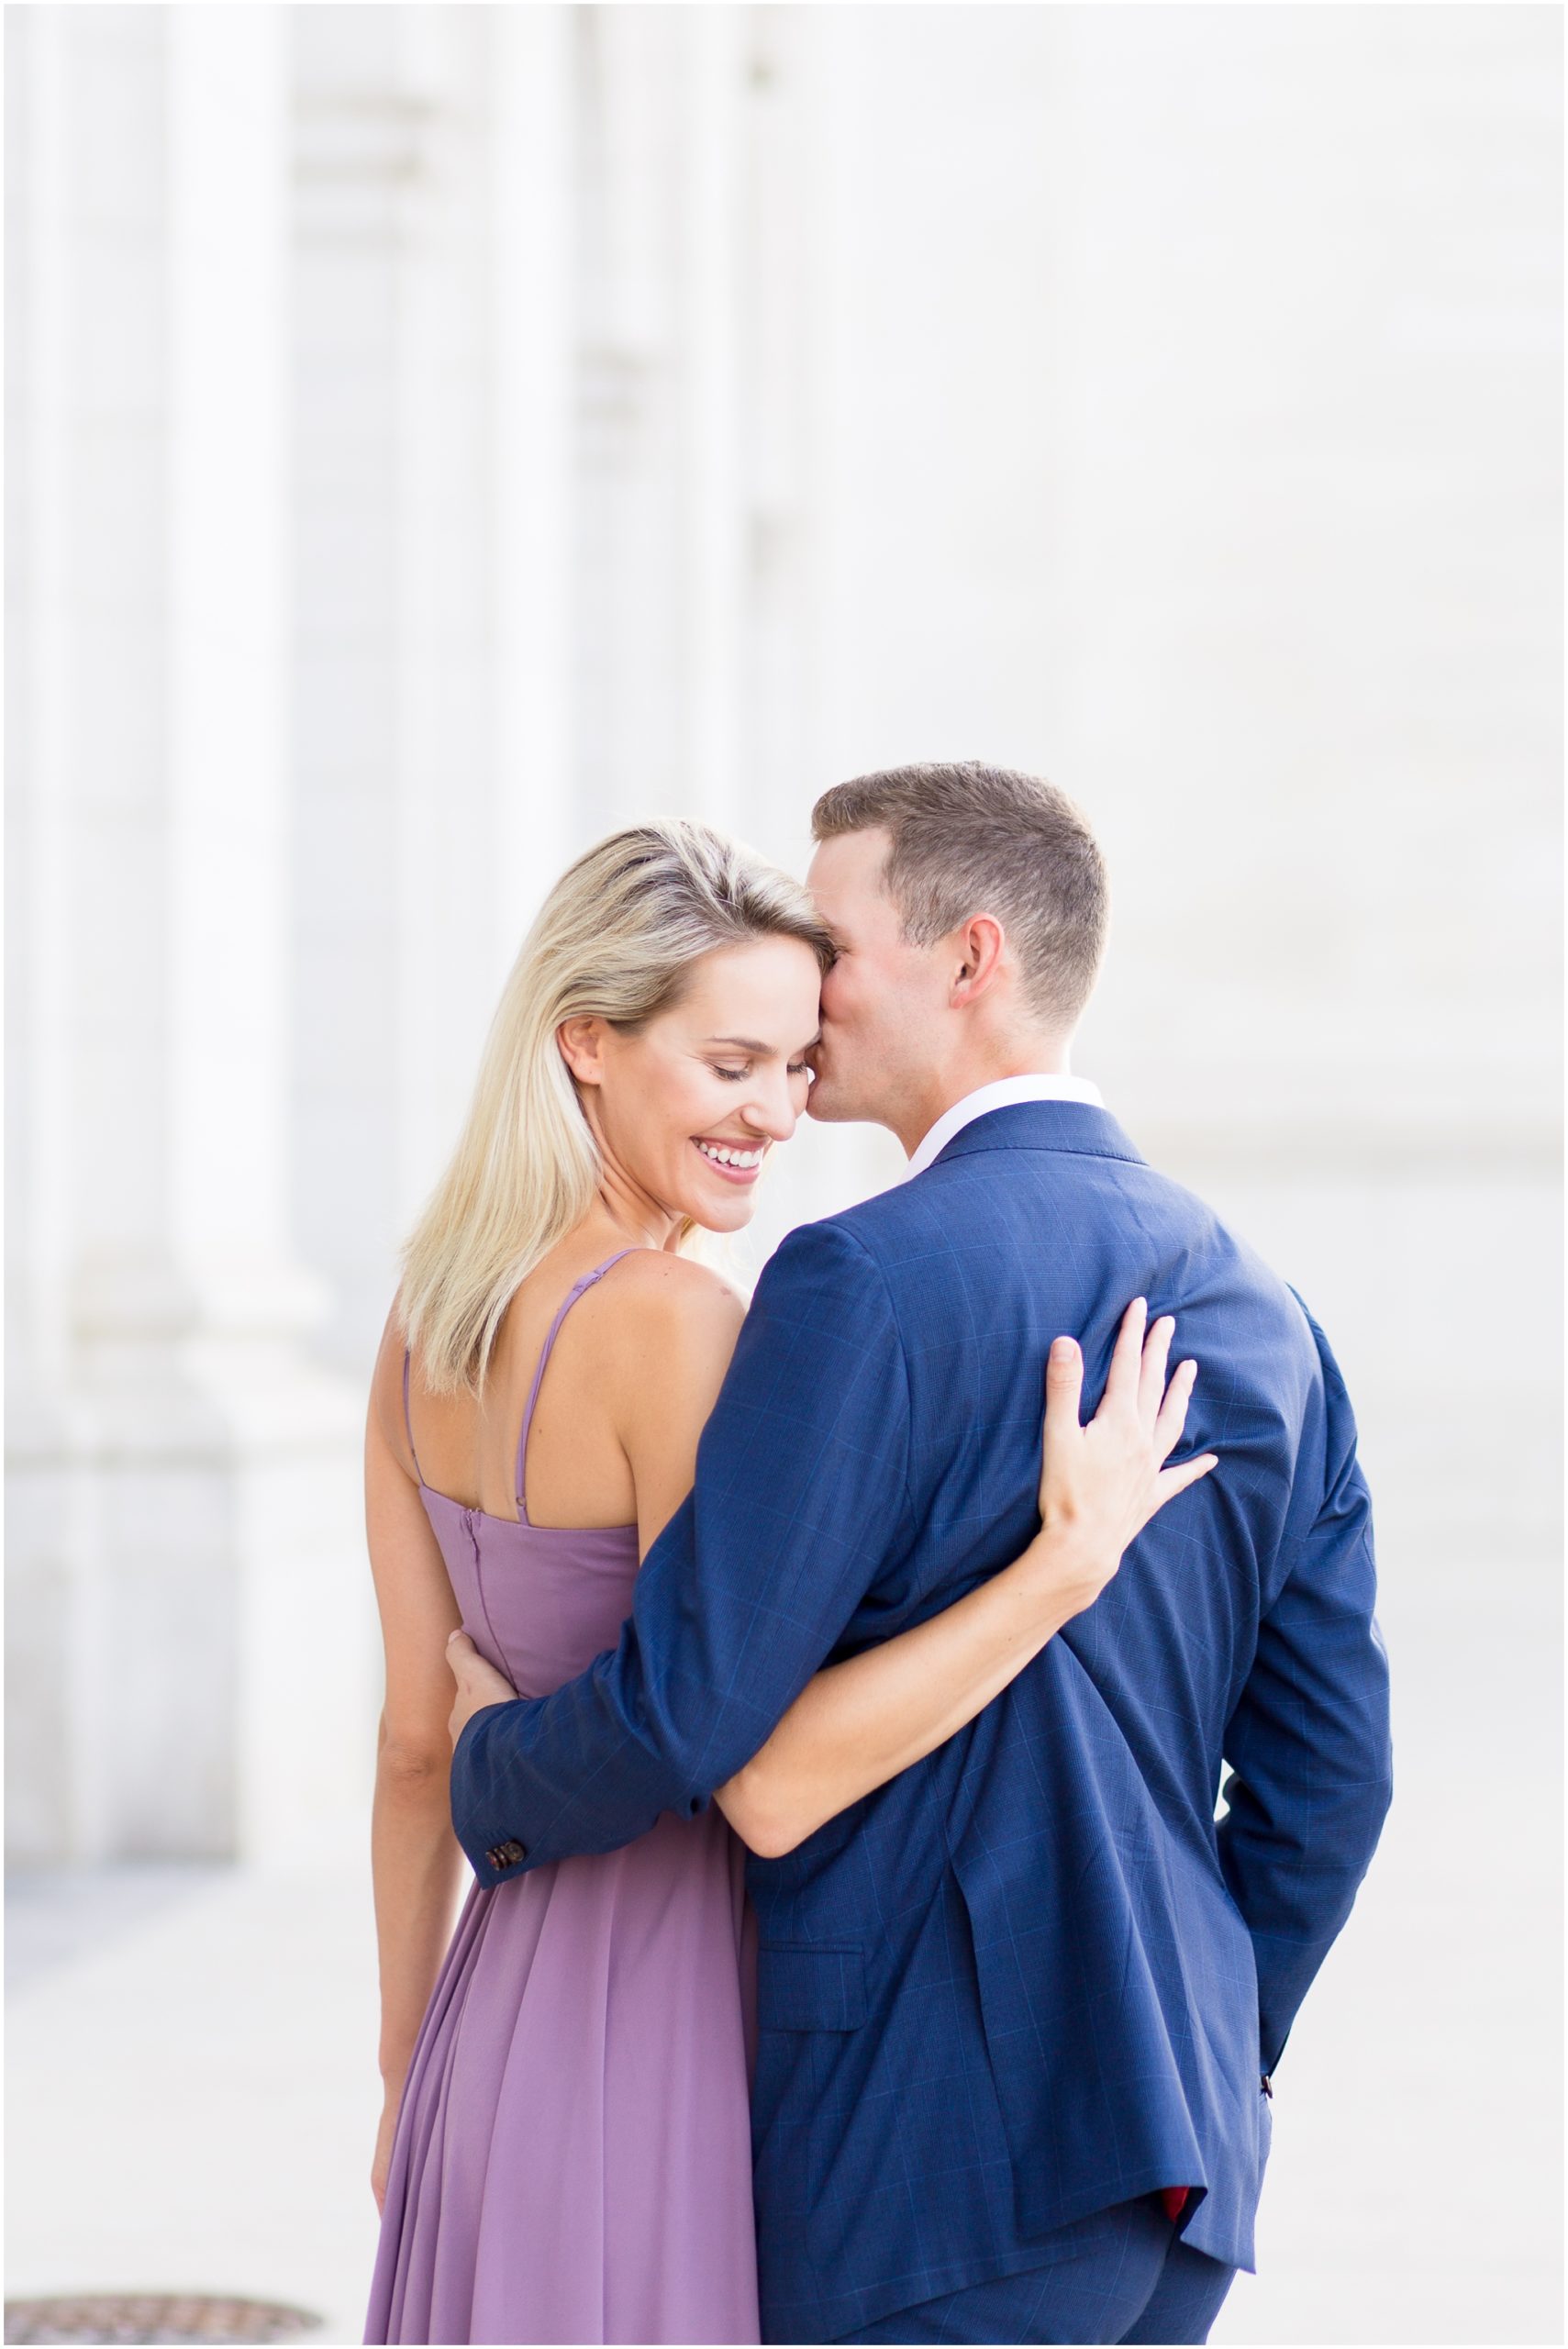 Union Station engagement session at Union Station wedding venue captured by Taylor Rose Photography